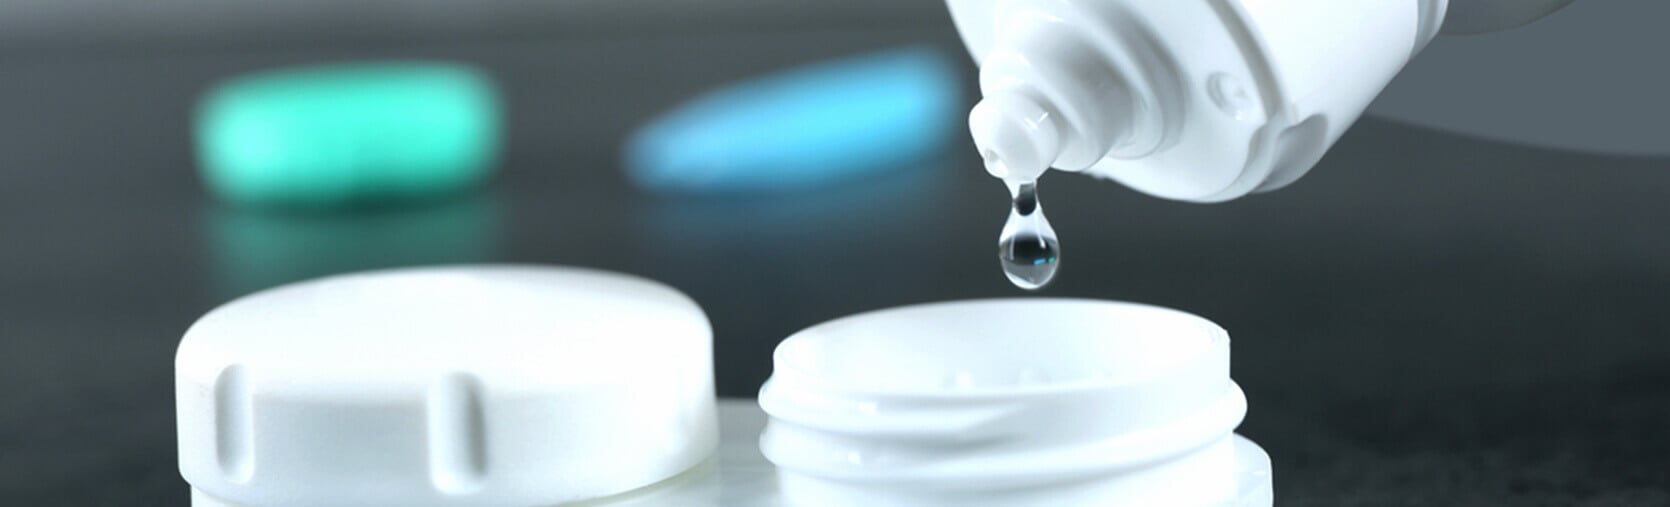 Contact lens cleaners & saline solution